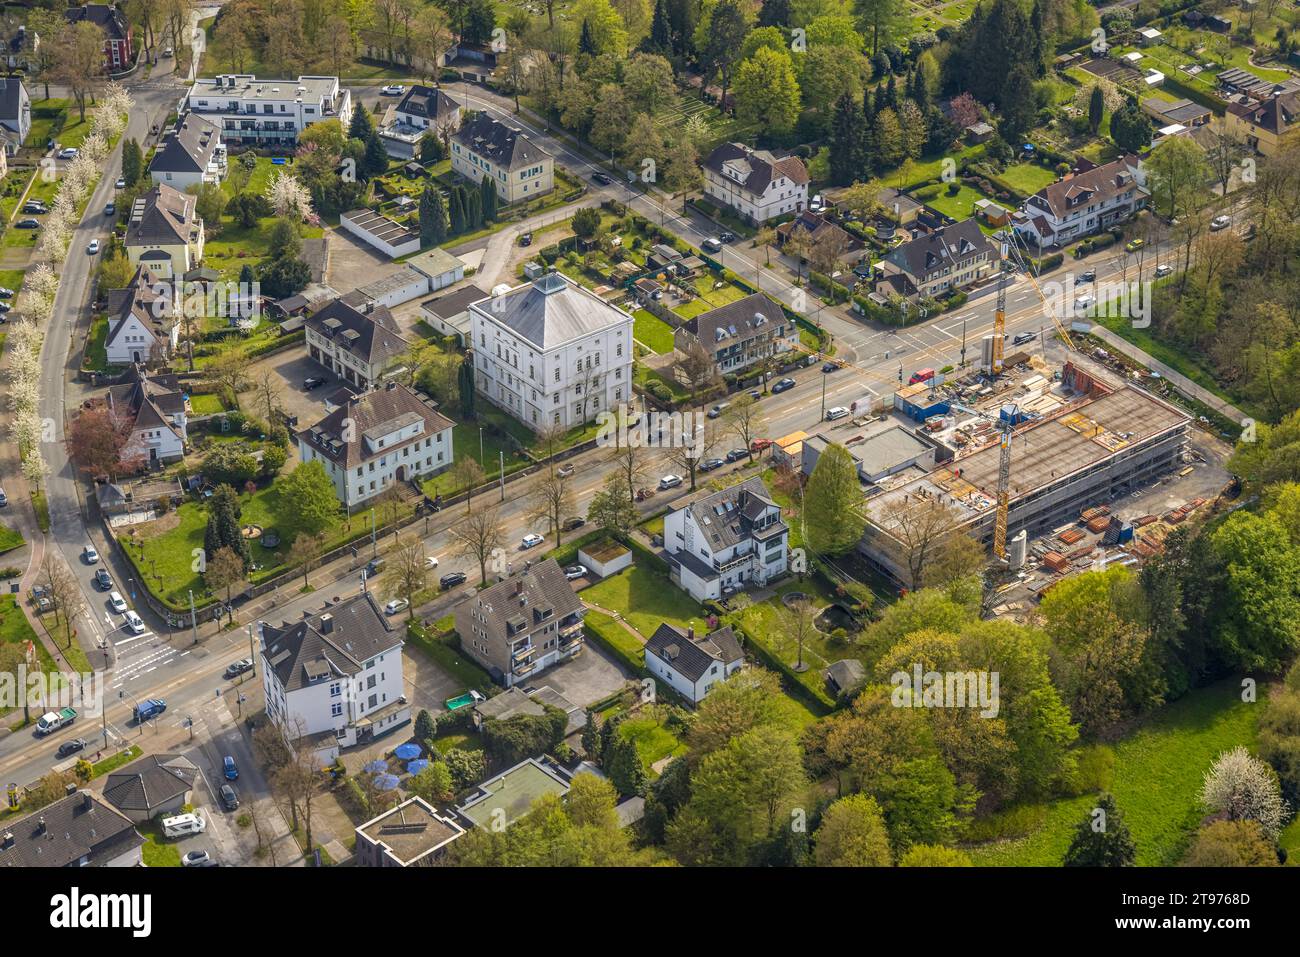 Aerial view, Fidena Theater, construction site and new fire station and rescue station, Hattinger Straße, Weitmar-Mark, Bochum, Ruhr area, North Rhine Stock Photo